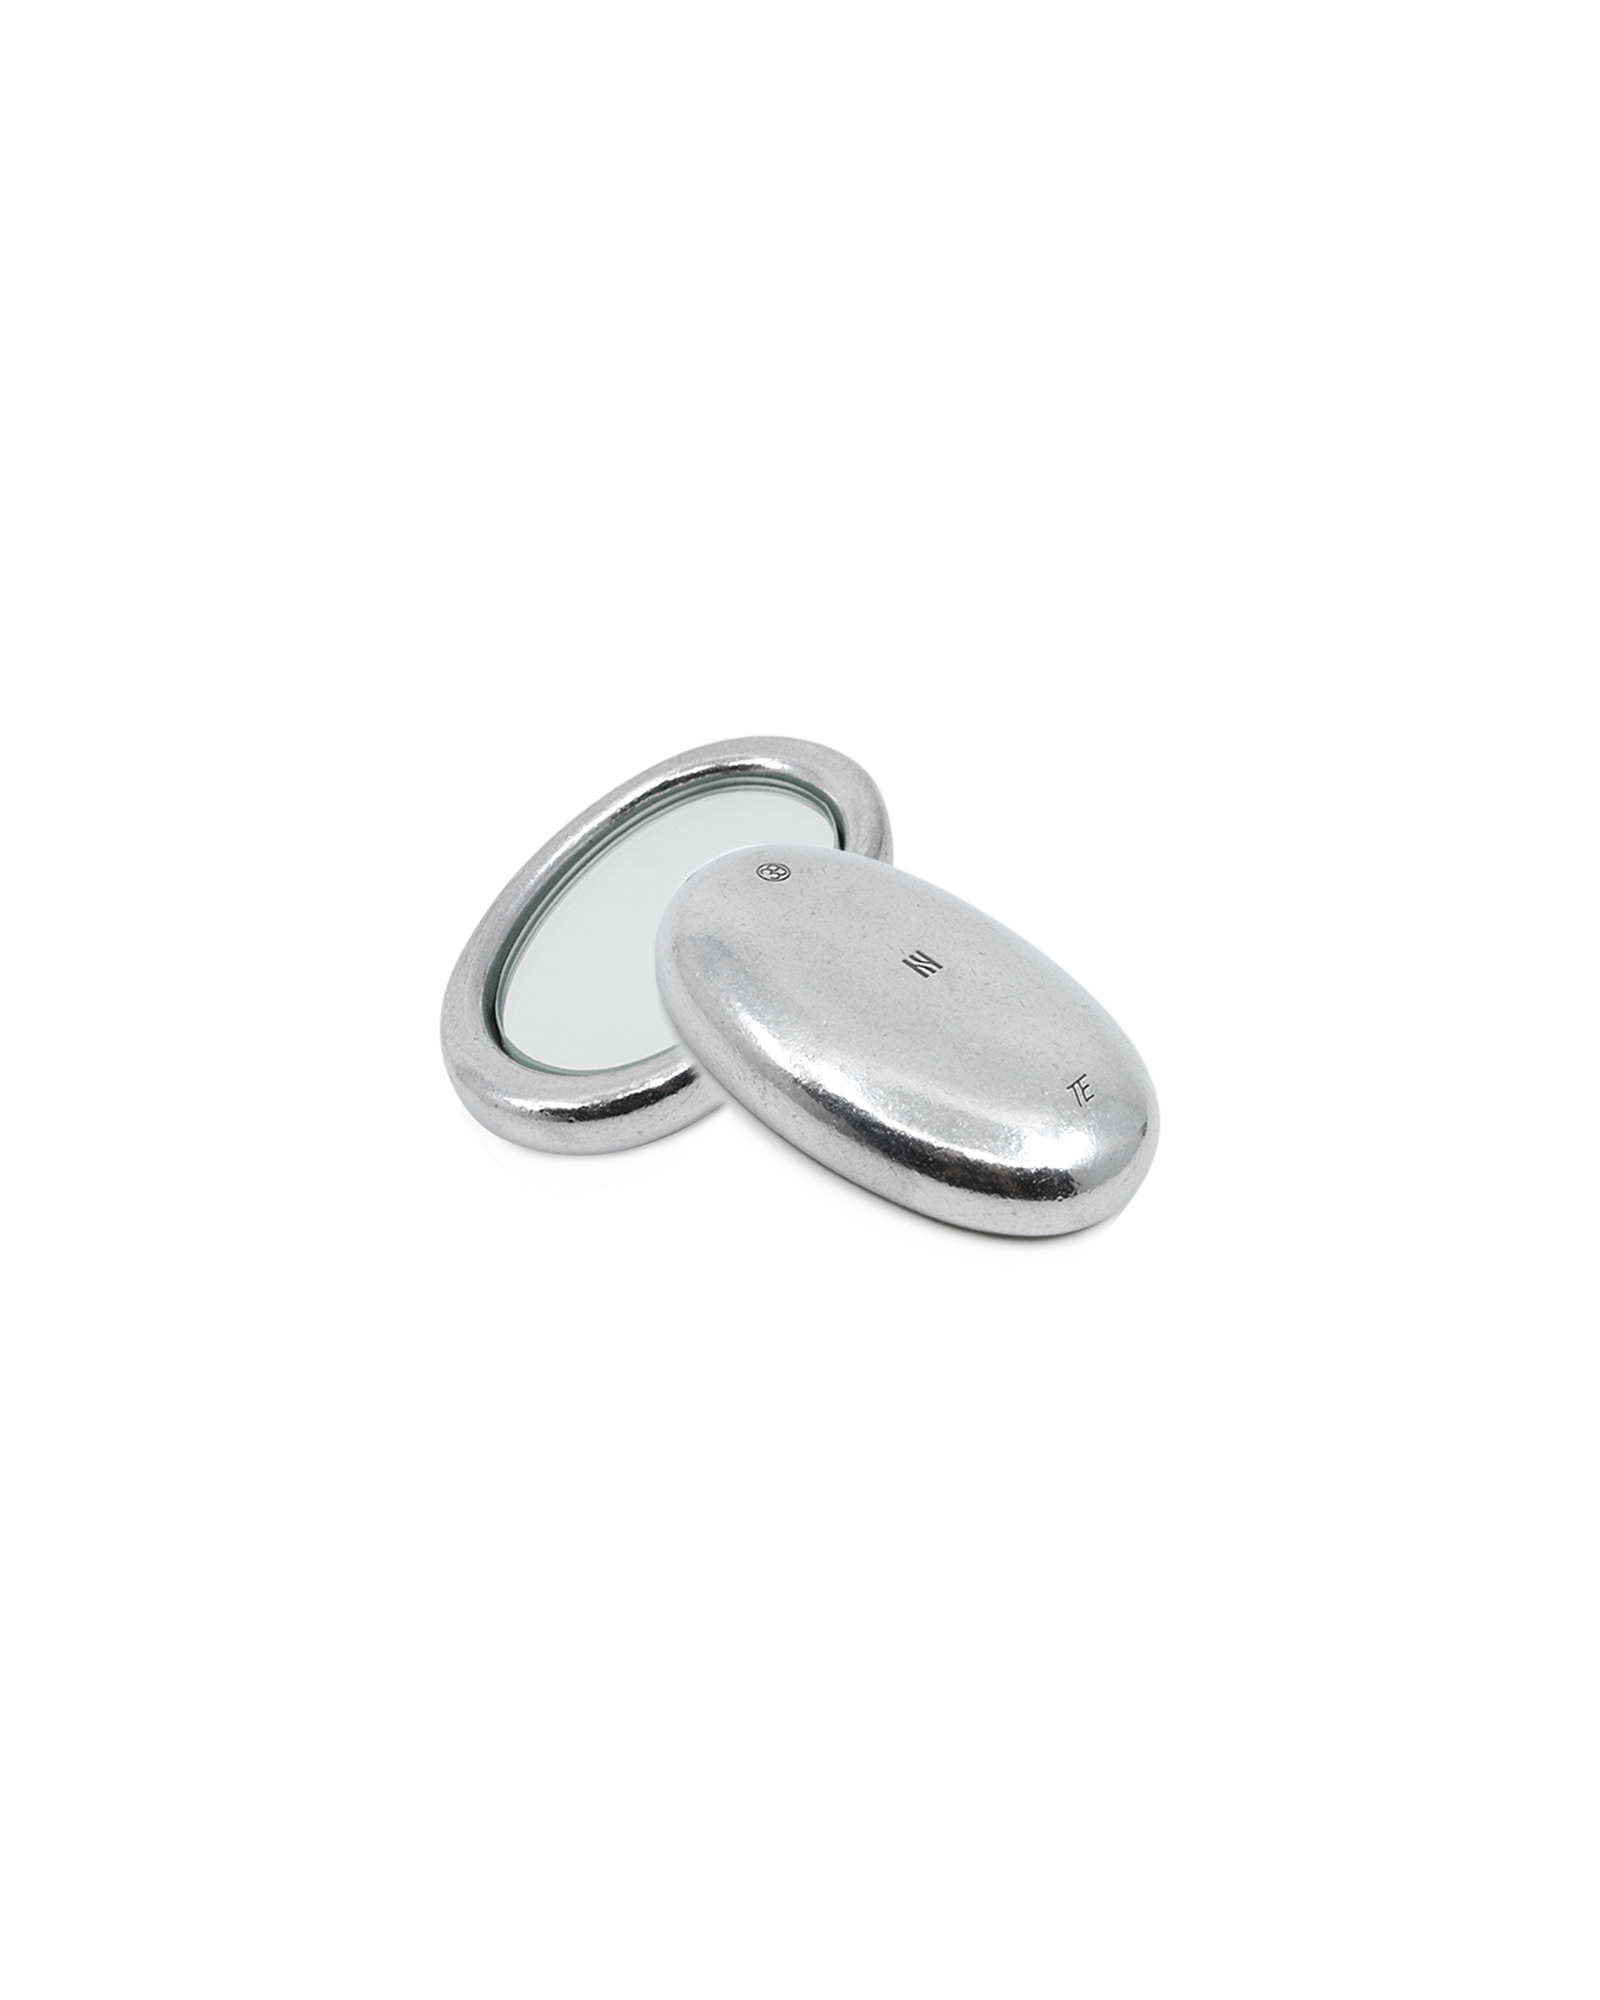 EXCAVATION Plumpy Oval Mirror (limited)